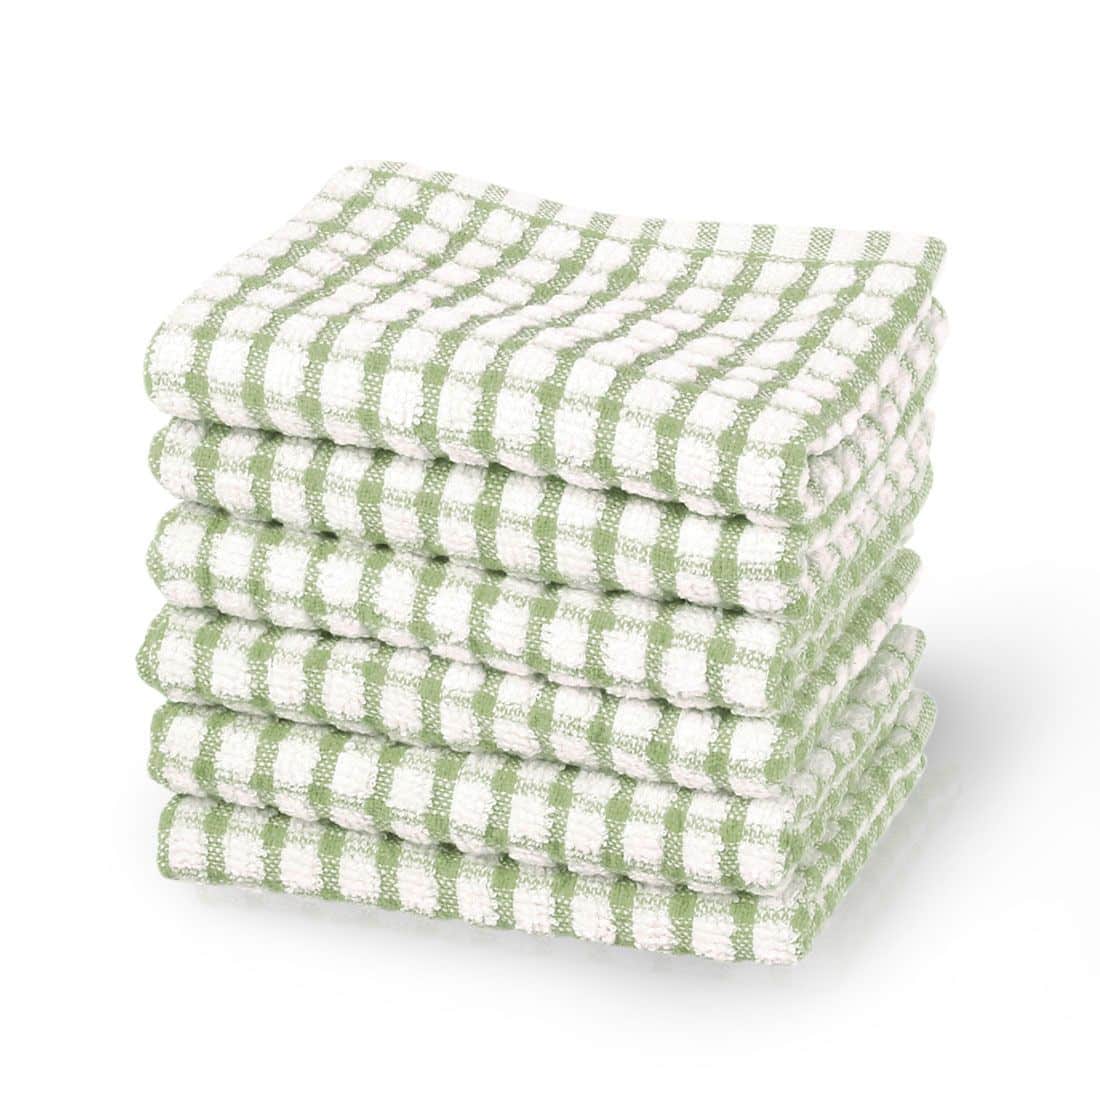 Terry Cotton Dish Cleaning Towels Green 6pcs $17.89(50% Off)